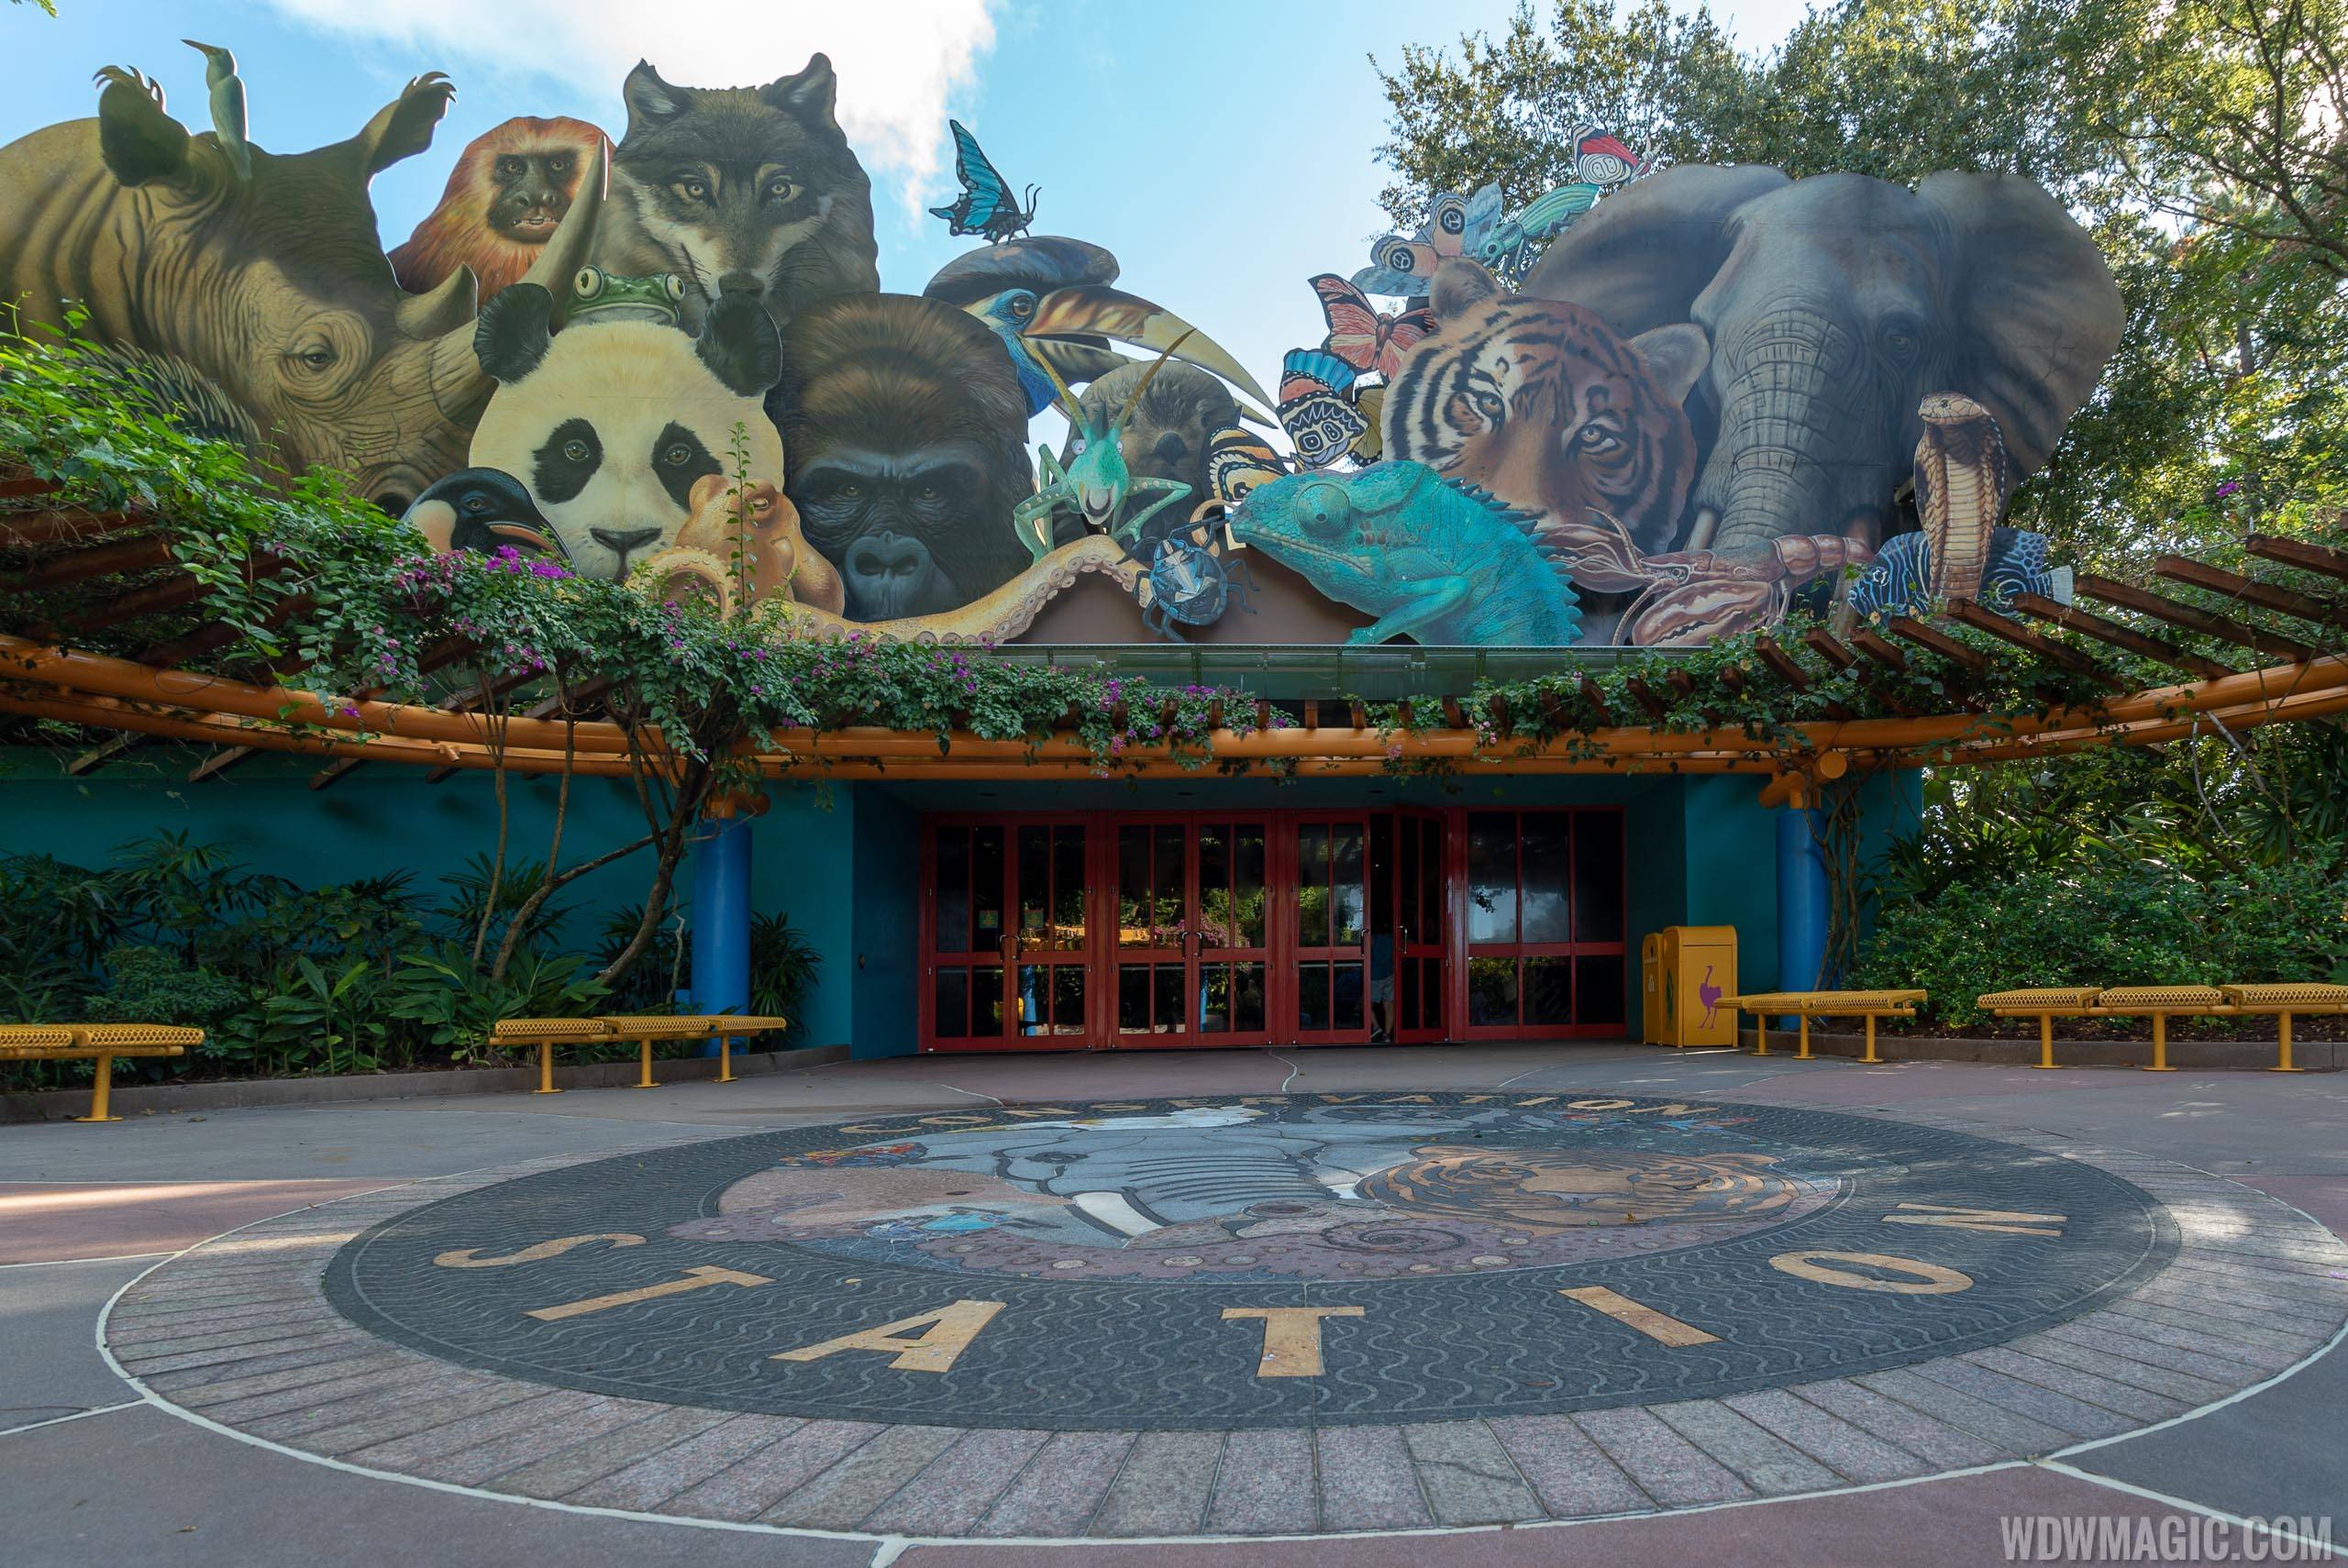 Rafiki's Planet Watch 'Affection Section' closing for refurbishment